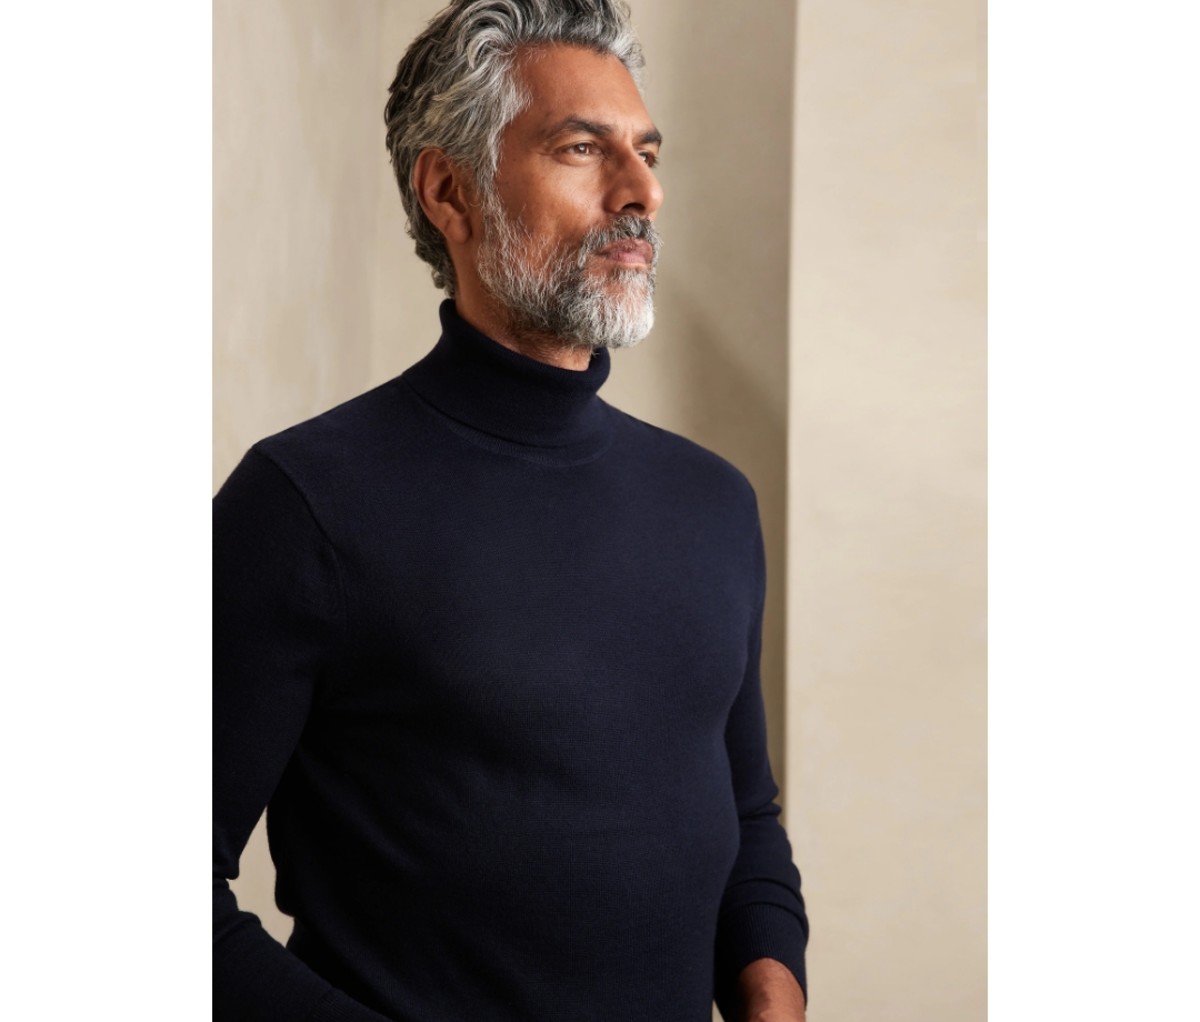 A High Collared Fashion Classic: The Iconic Black Turtleneck